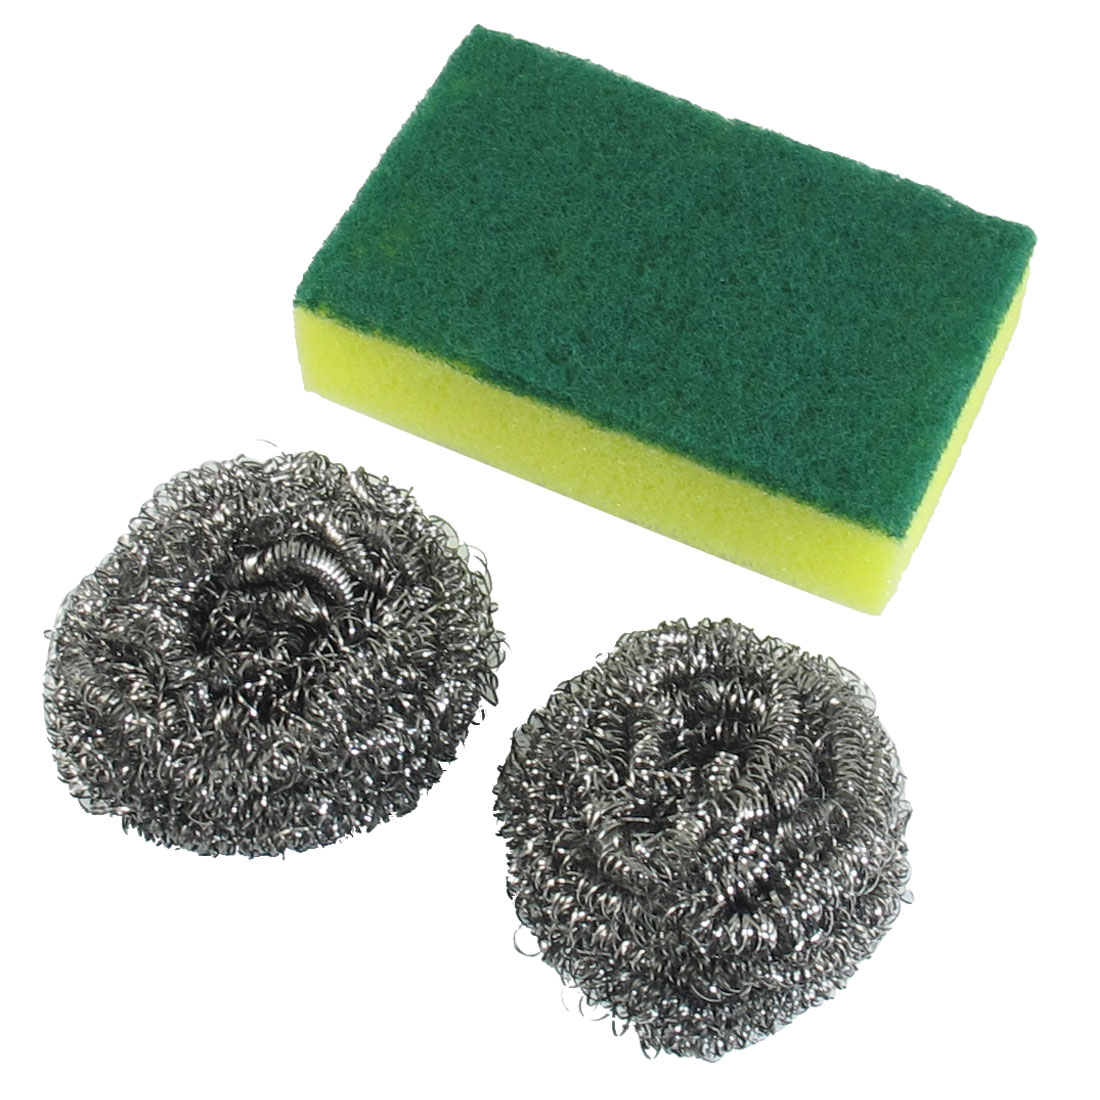 Cleaning sponges and steelwool pads